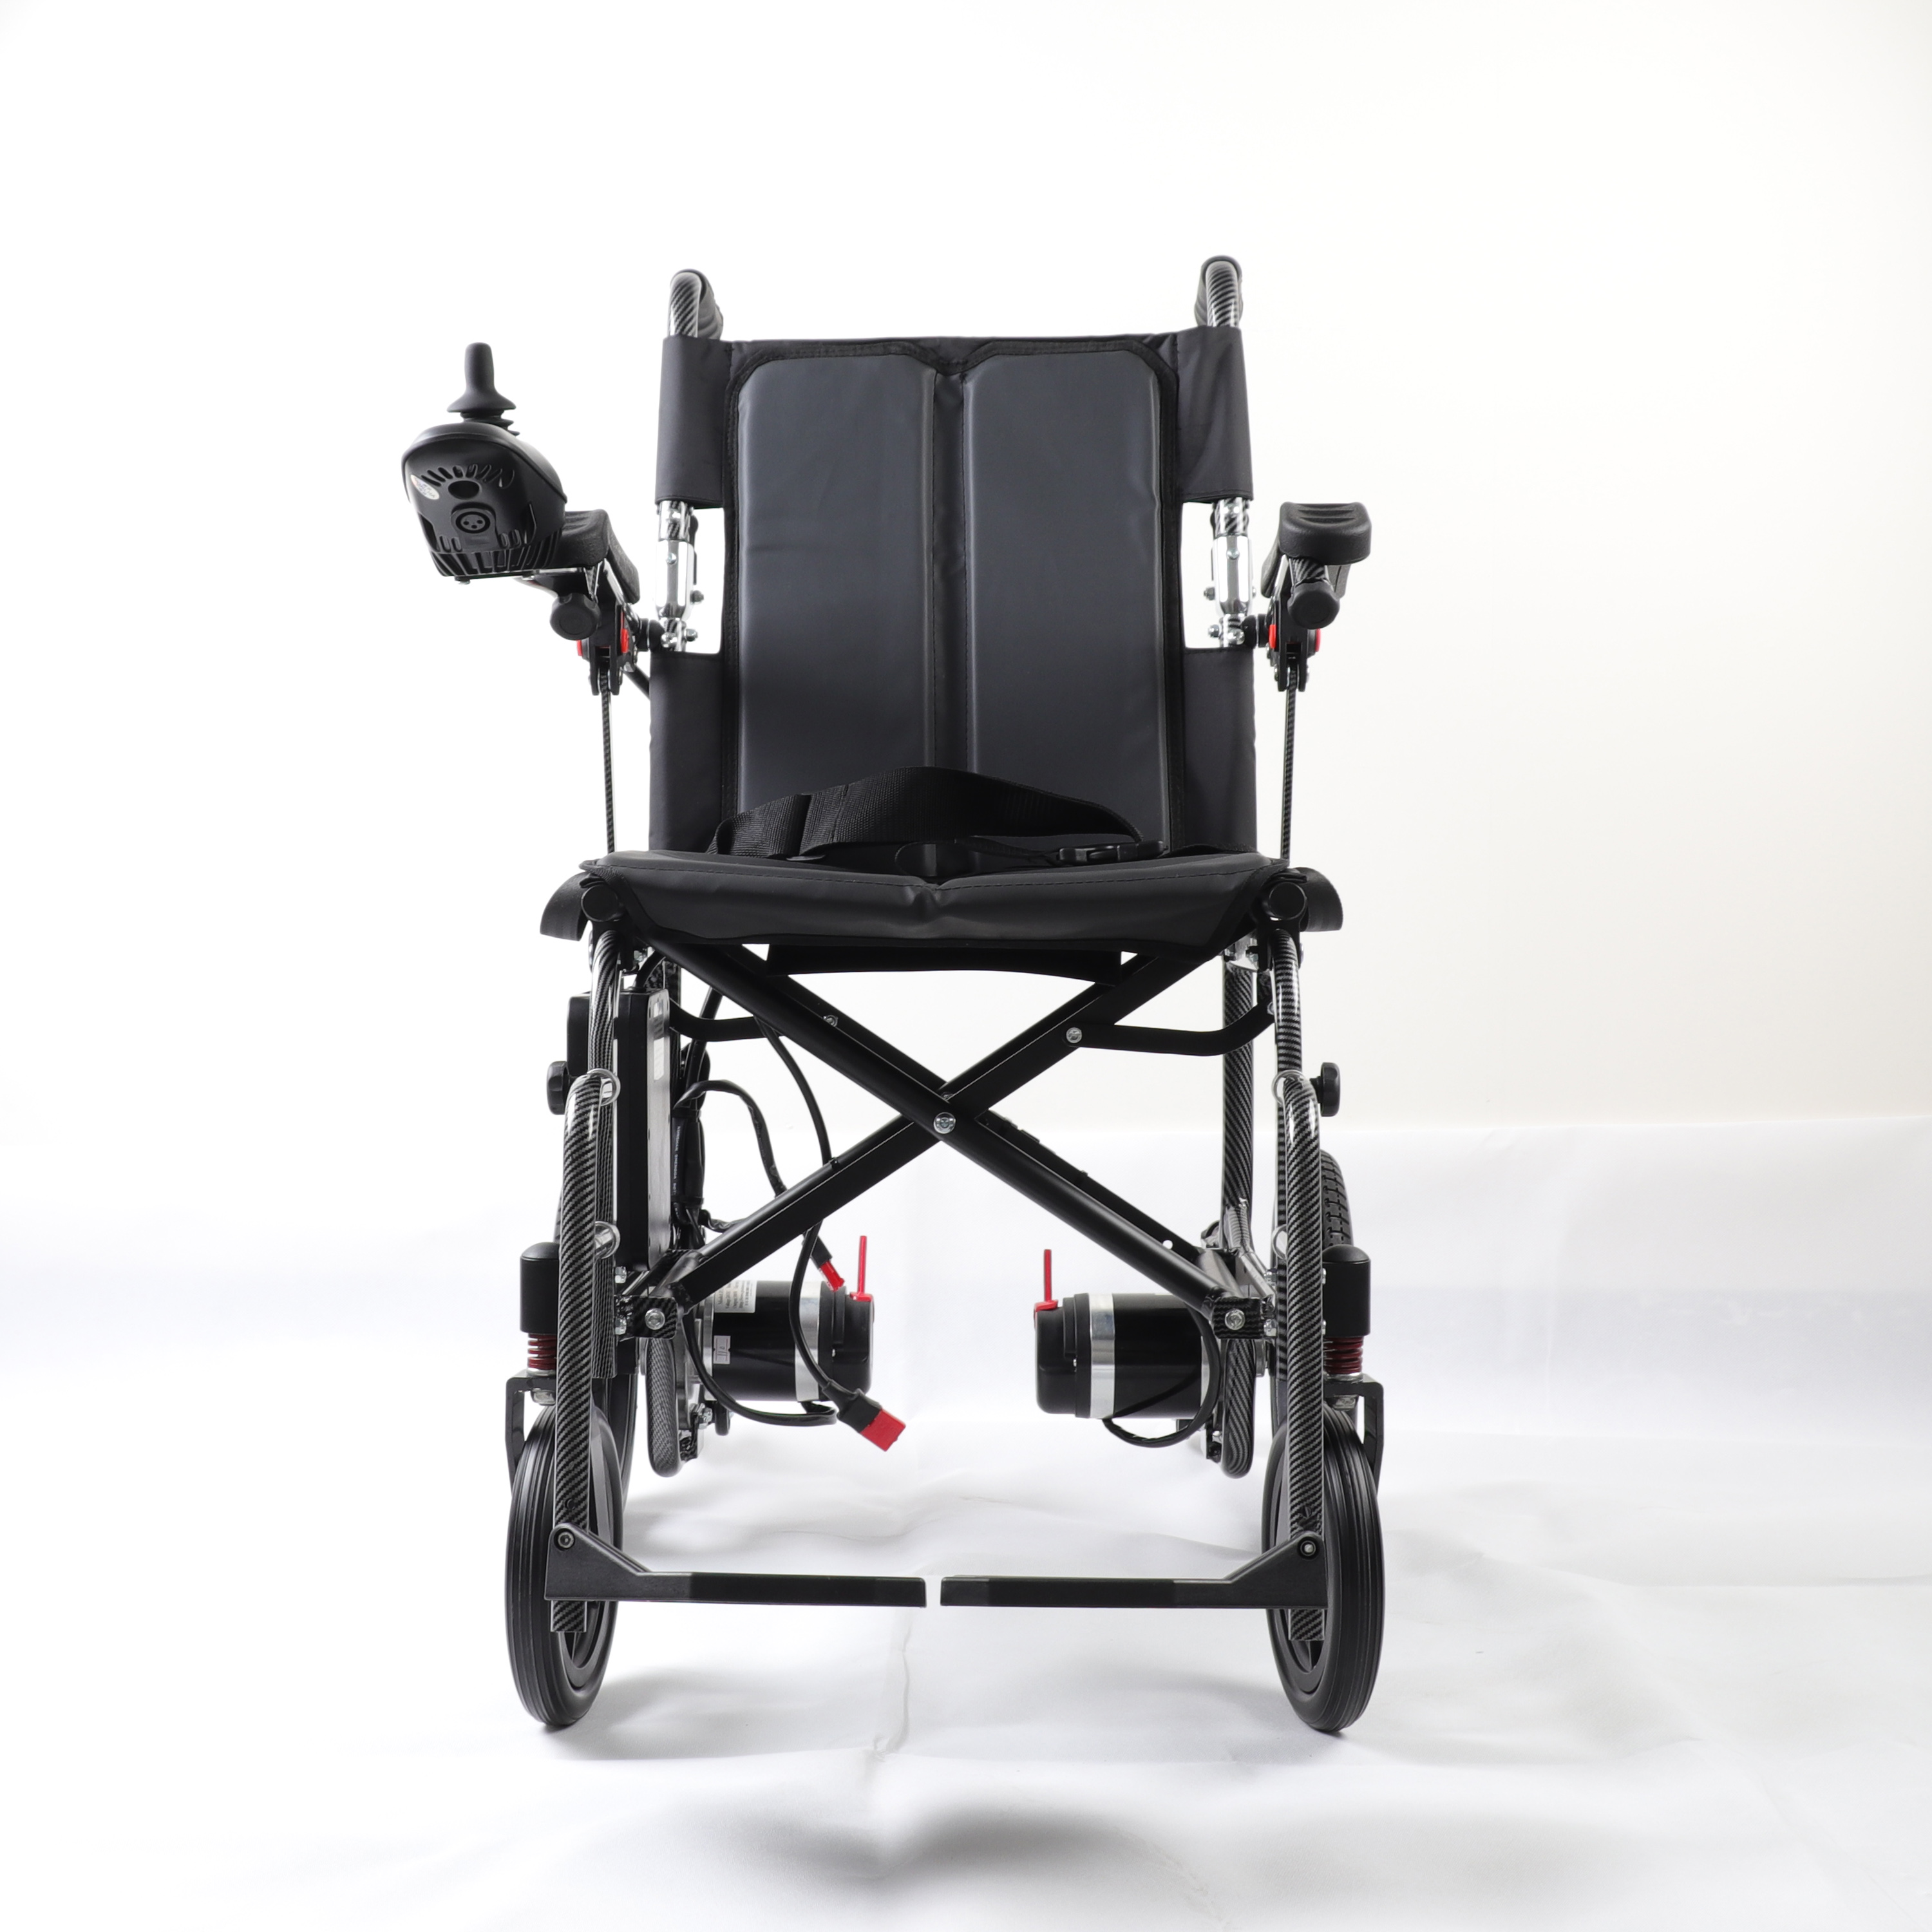 Is there an anti-collision device on the front of the electric wheelchair?